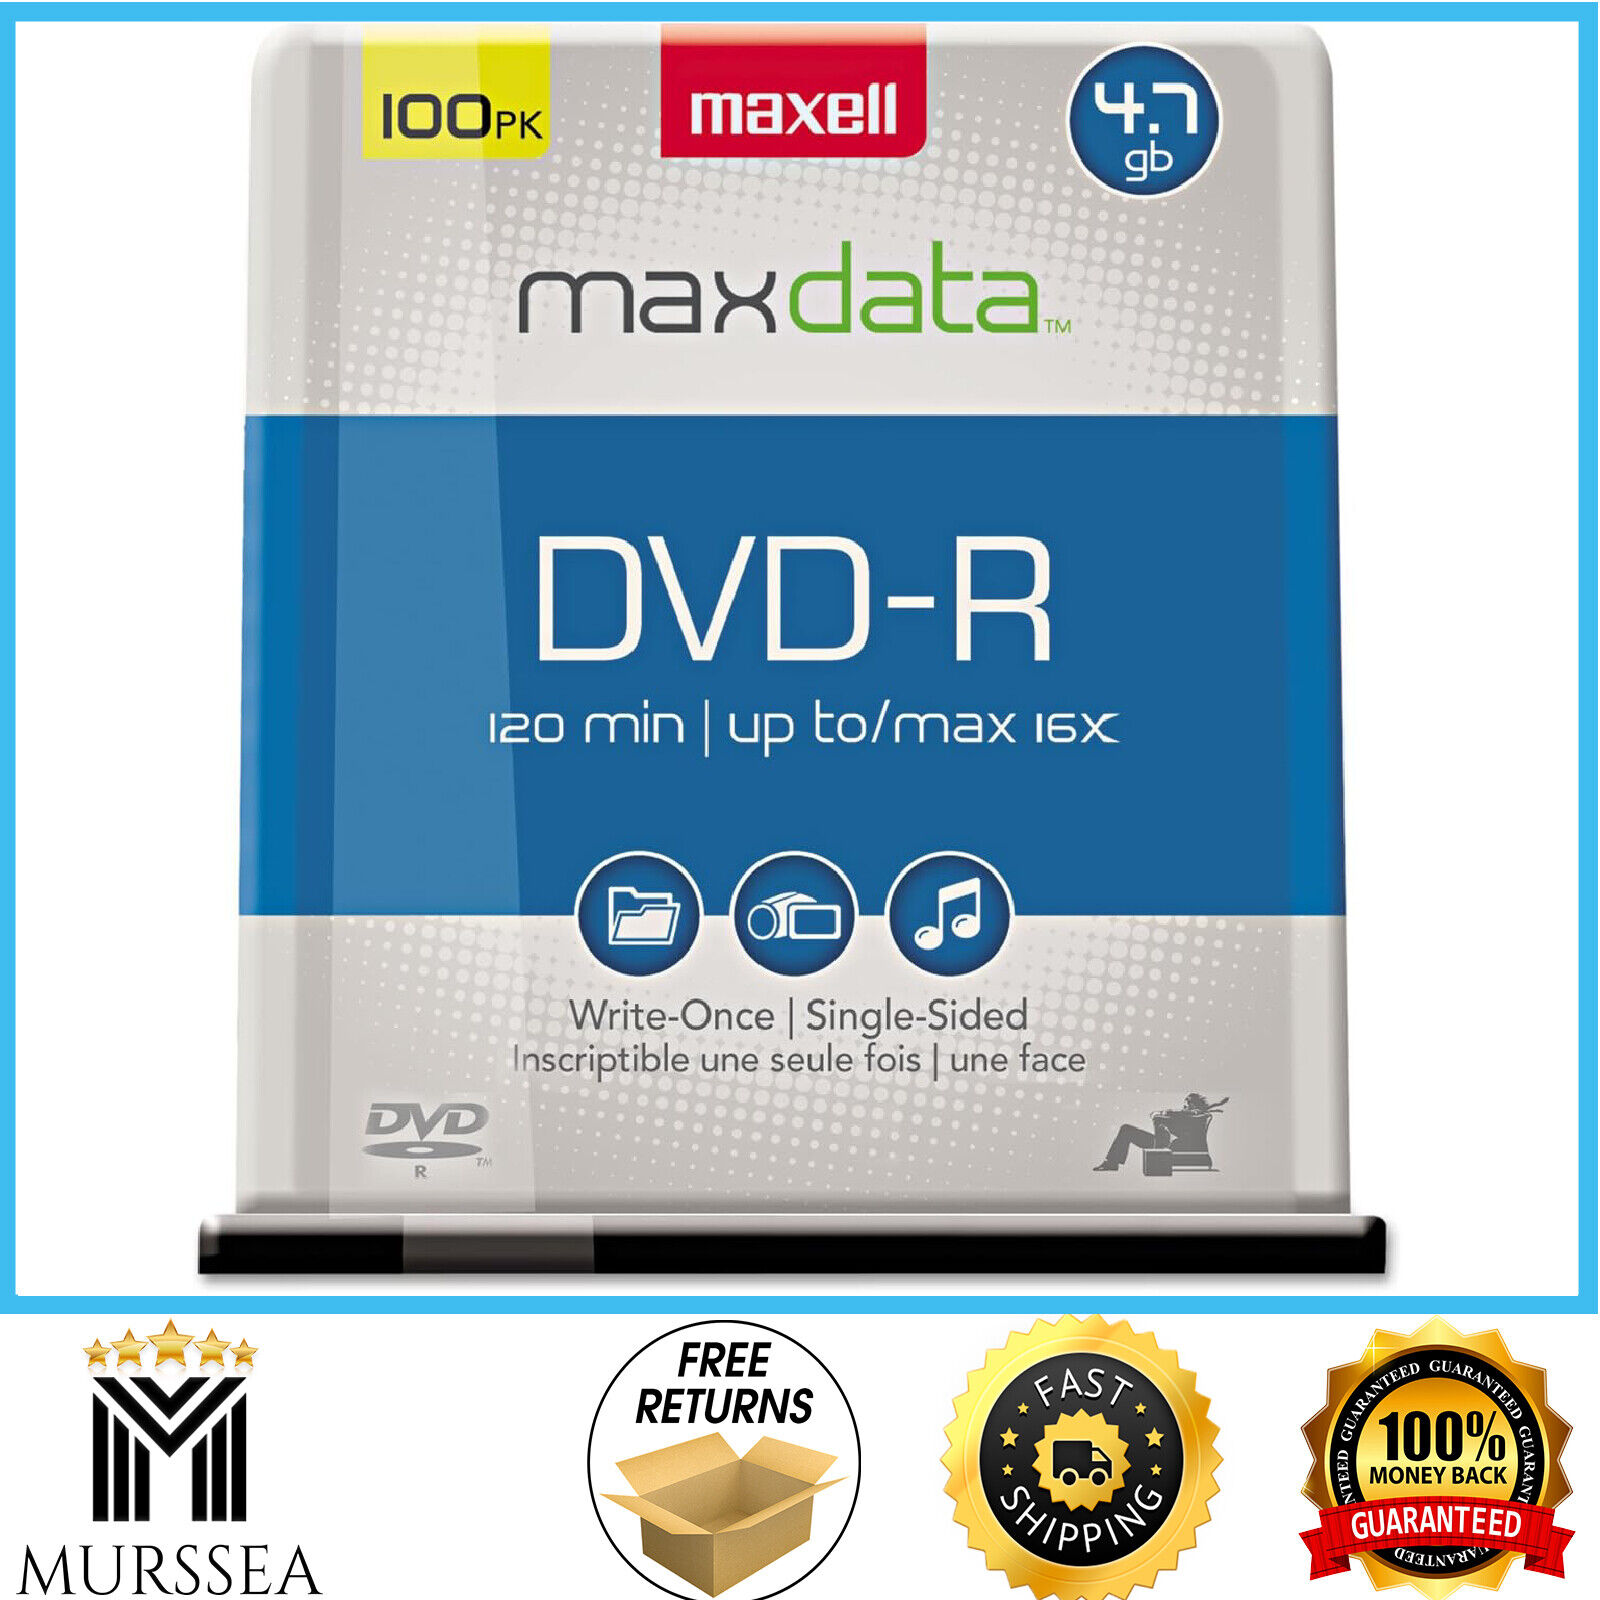 Maxell 638014 DVD-R Discs, 4.7GB, 16x, Spindle, Gold, 100 Pack High-speed record